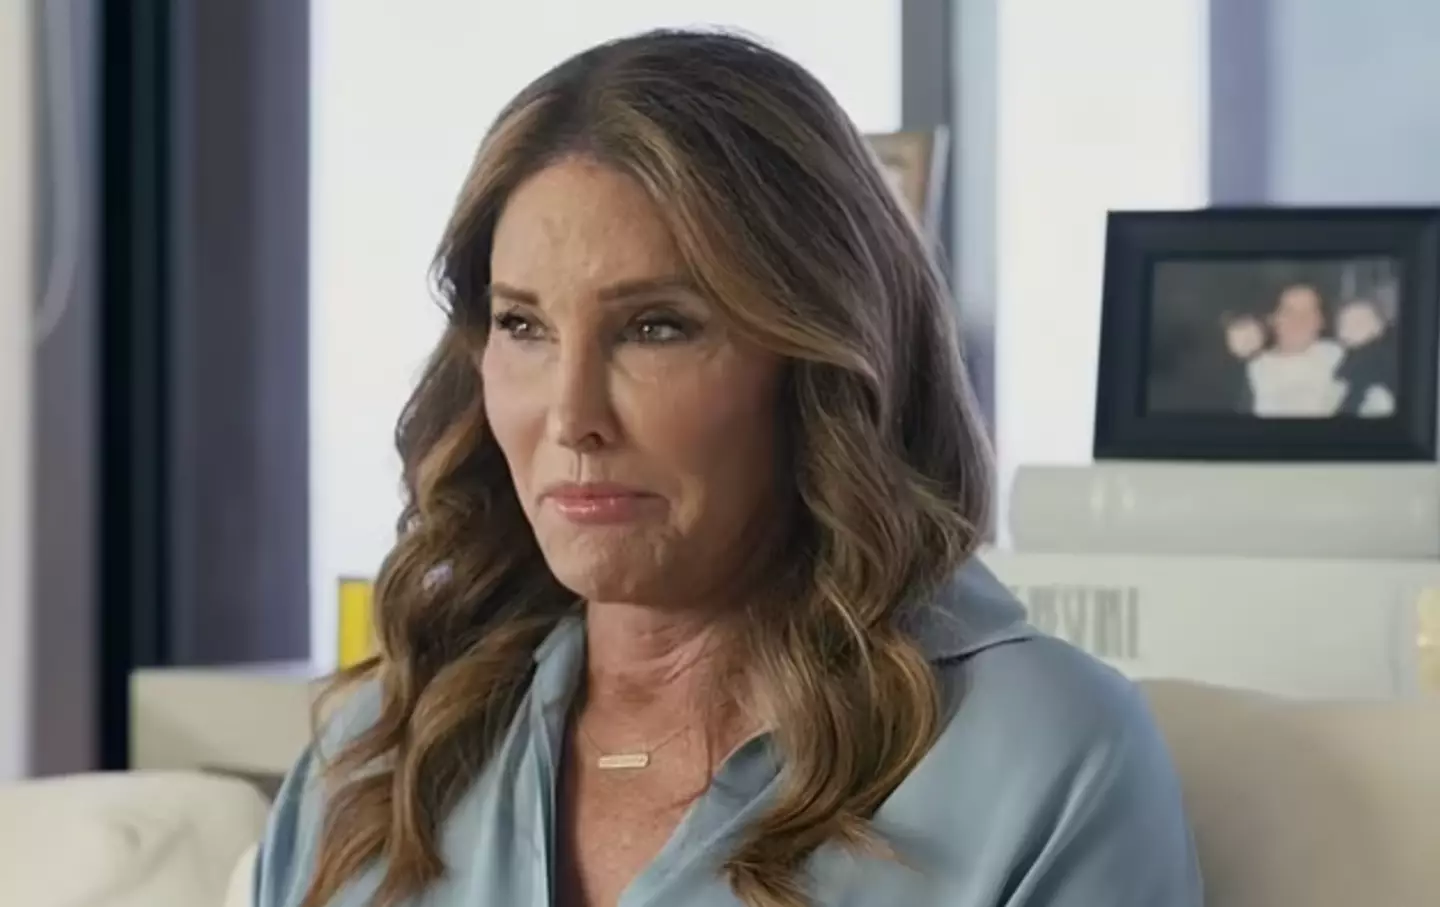 Caitlyn was interviewed about the family as part of the House of Kardashians documentary. (Sky)